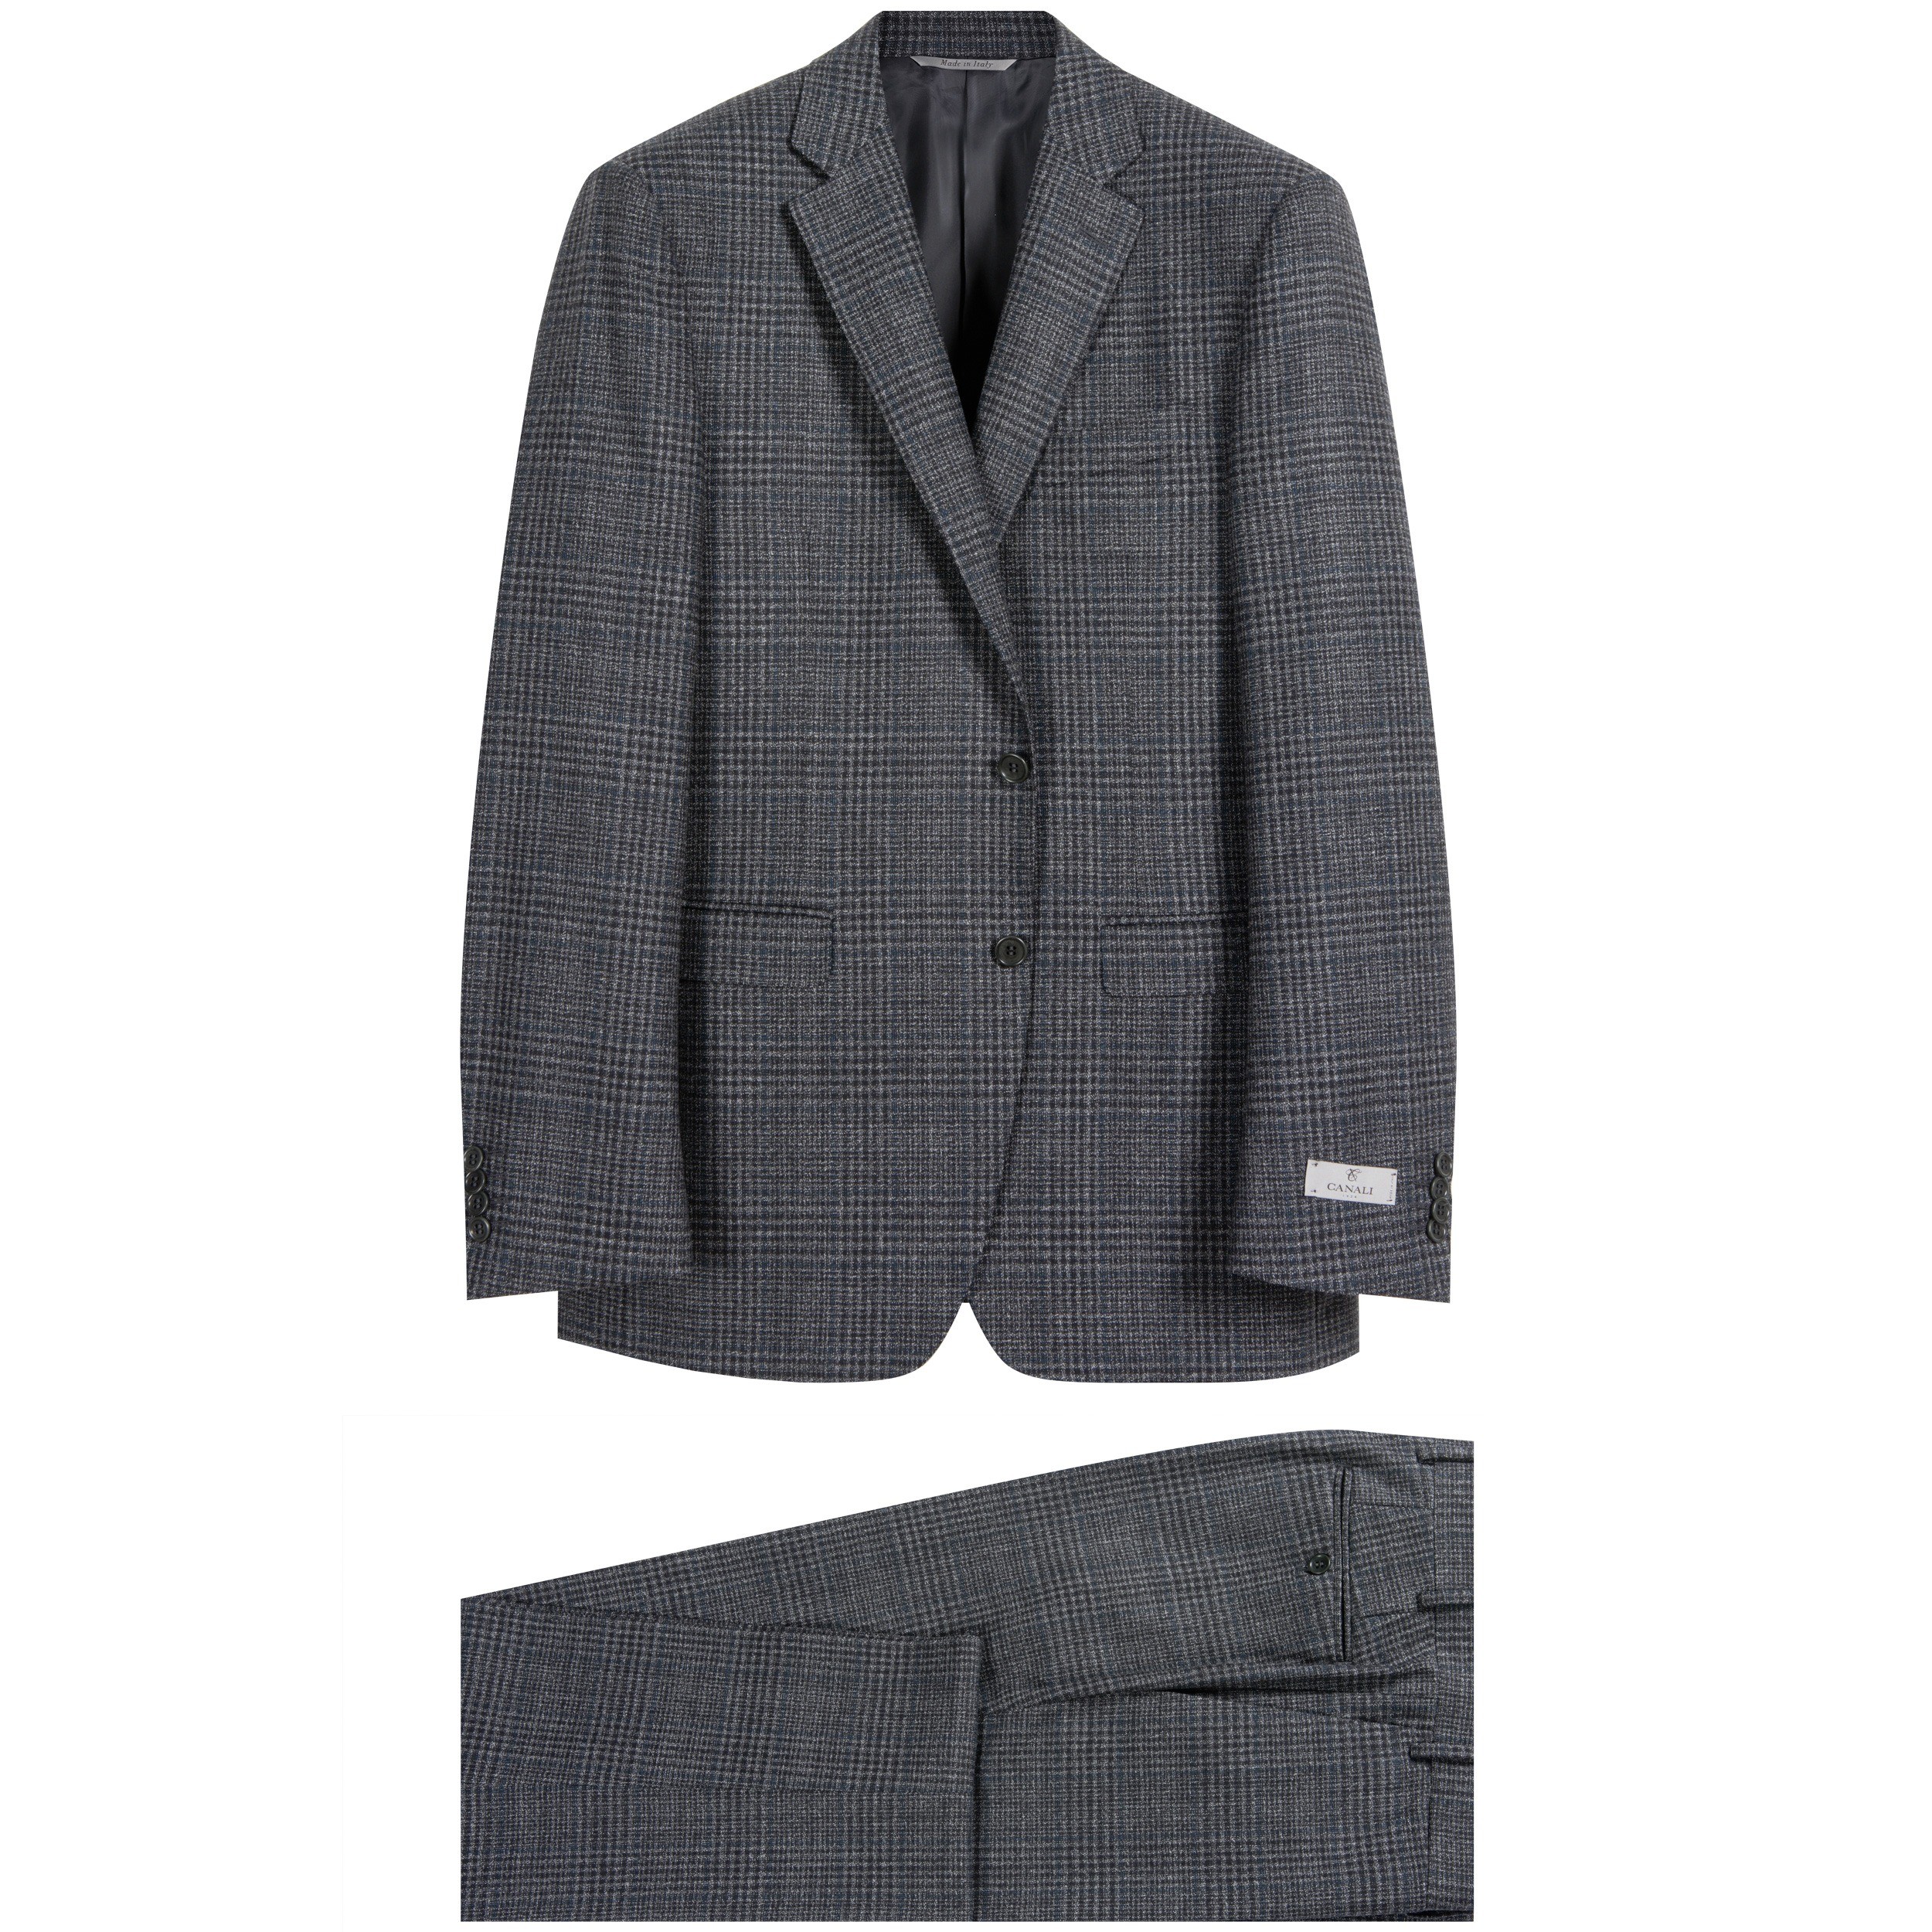 Canali Giant Check Wool Suit Grey